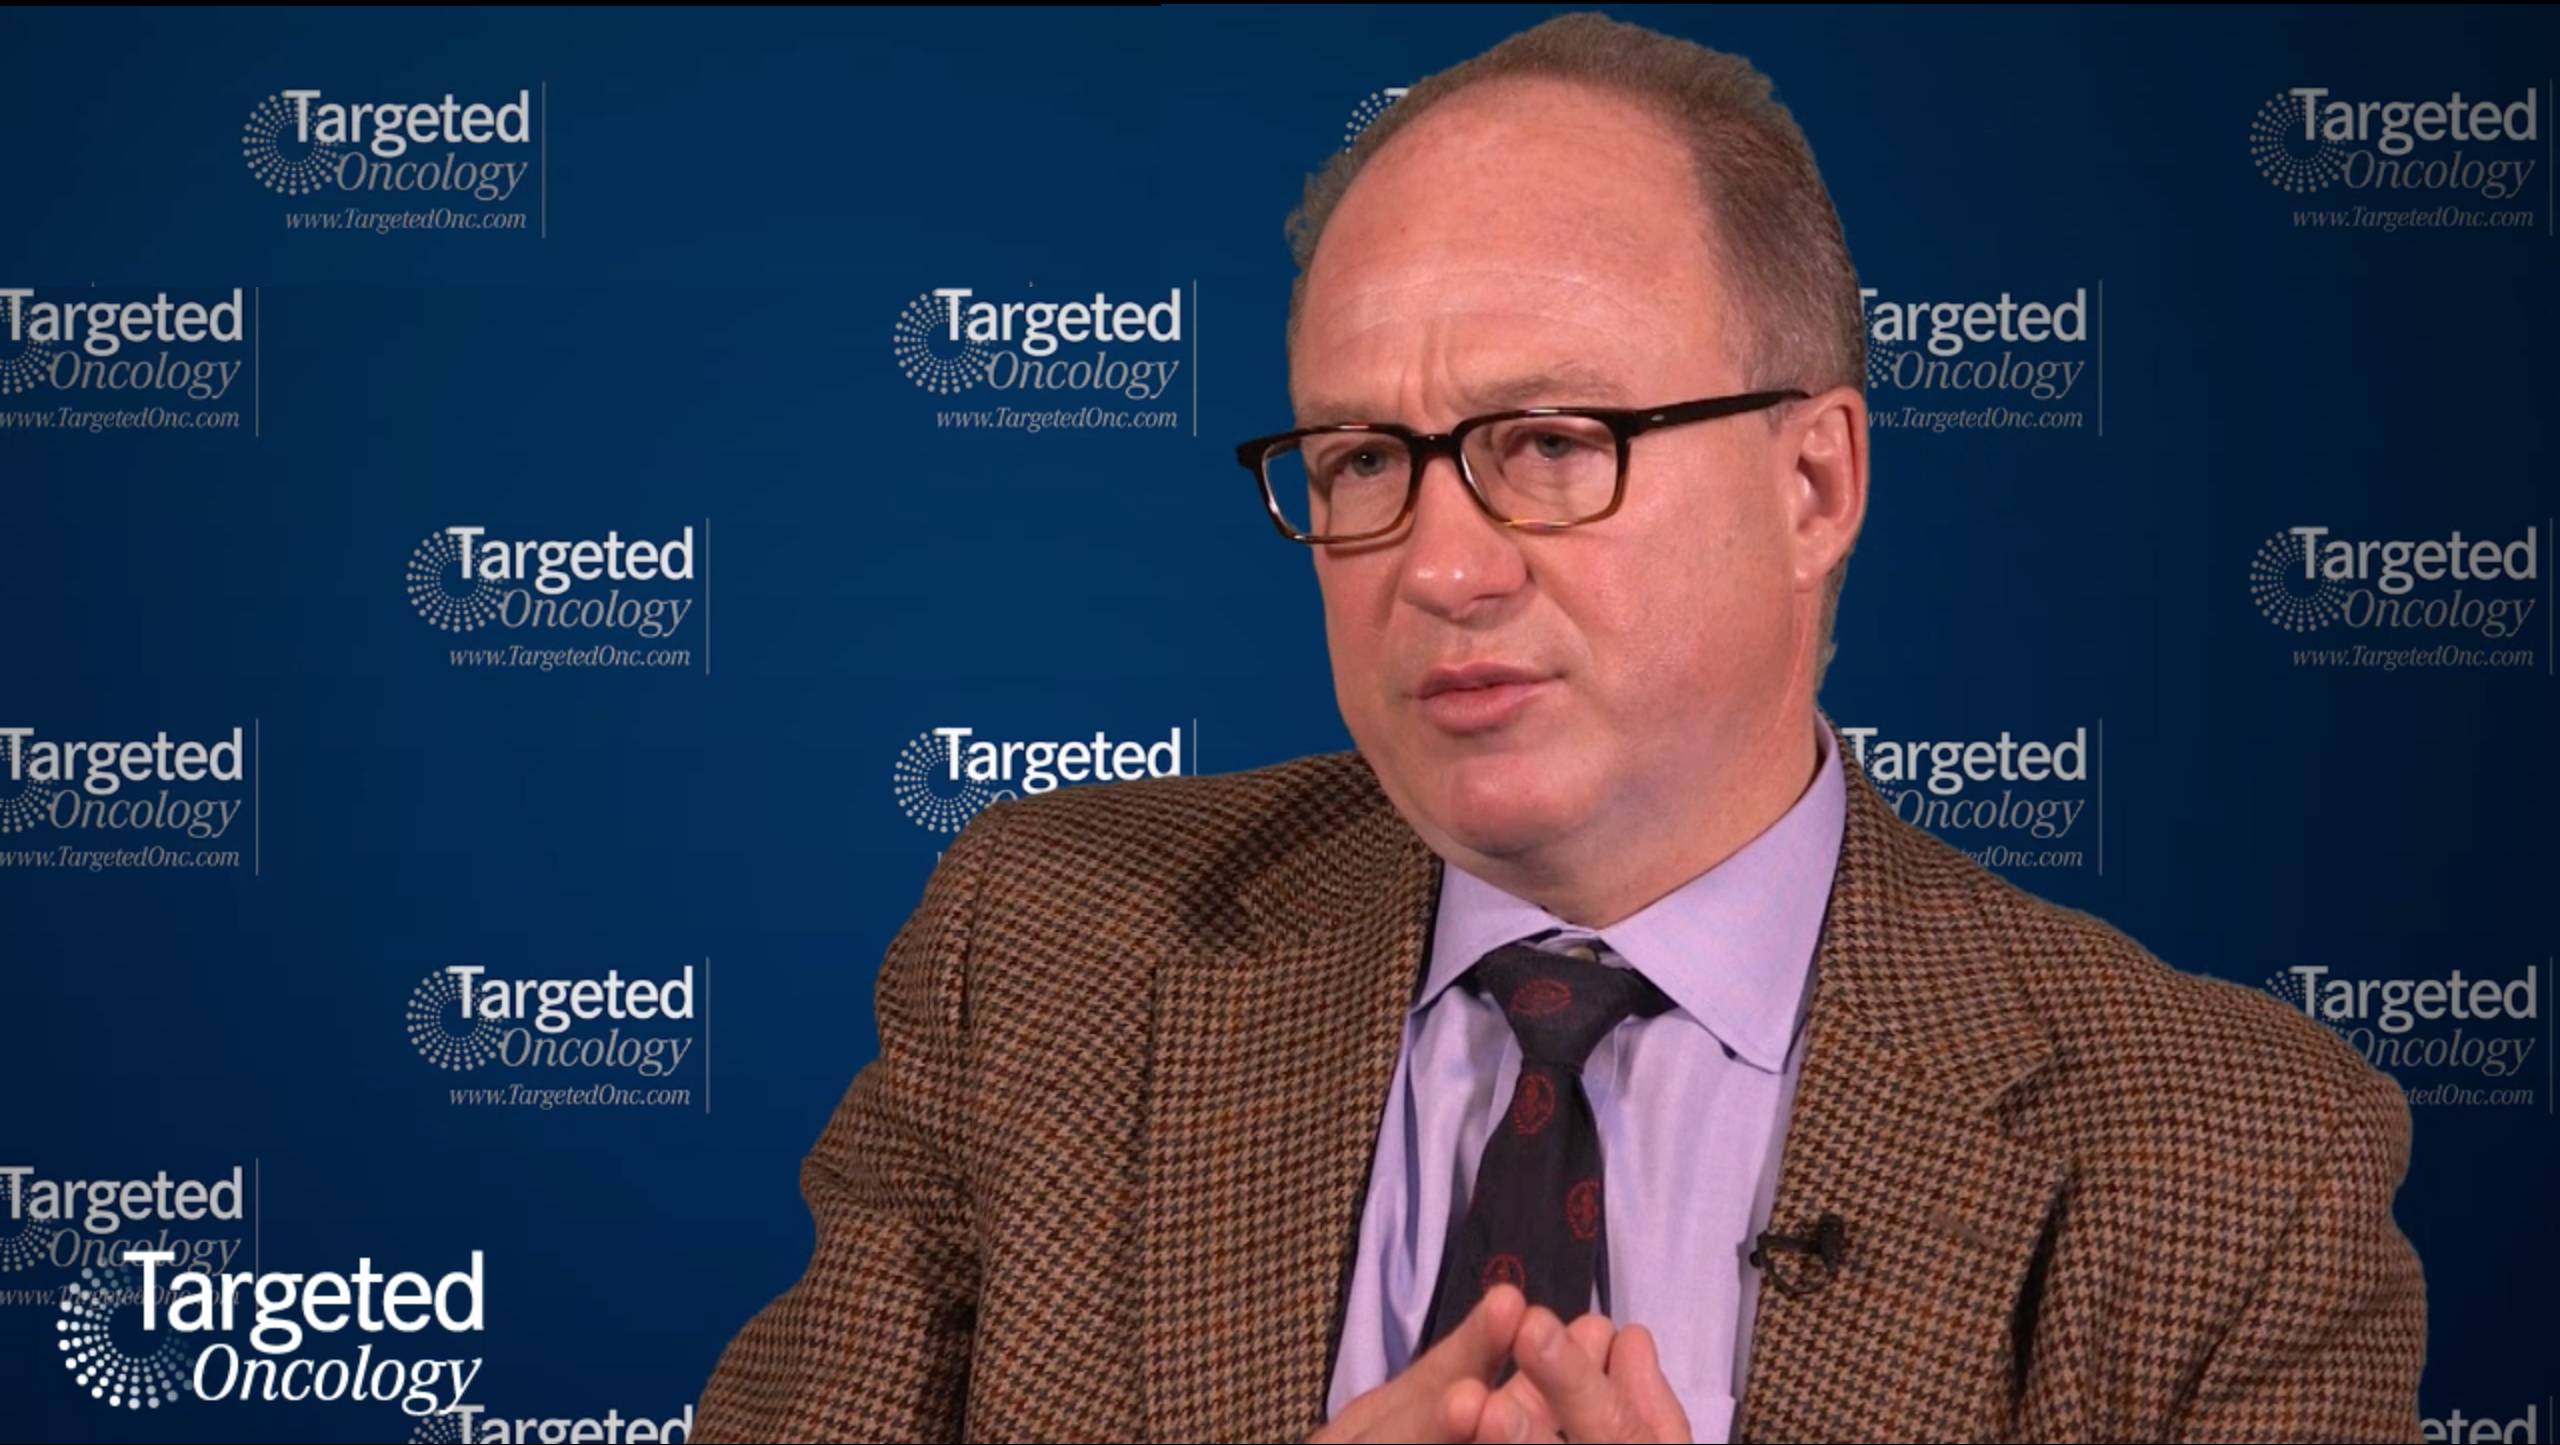 IMiD Sequencing in Relapsed Multiple Myeloma with Paul G. Richardson, MD Case 2